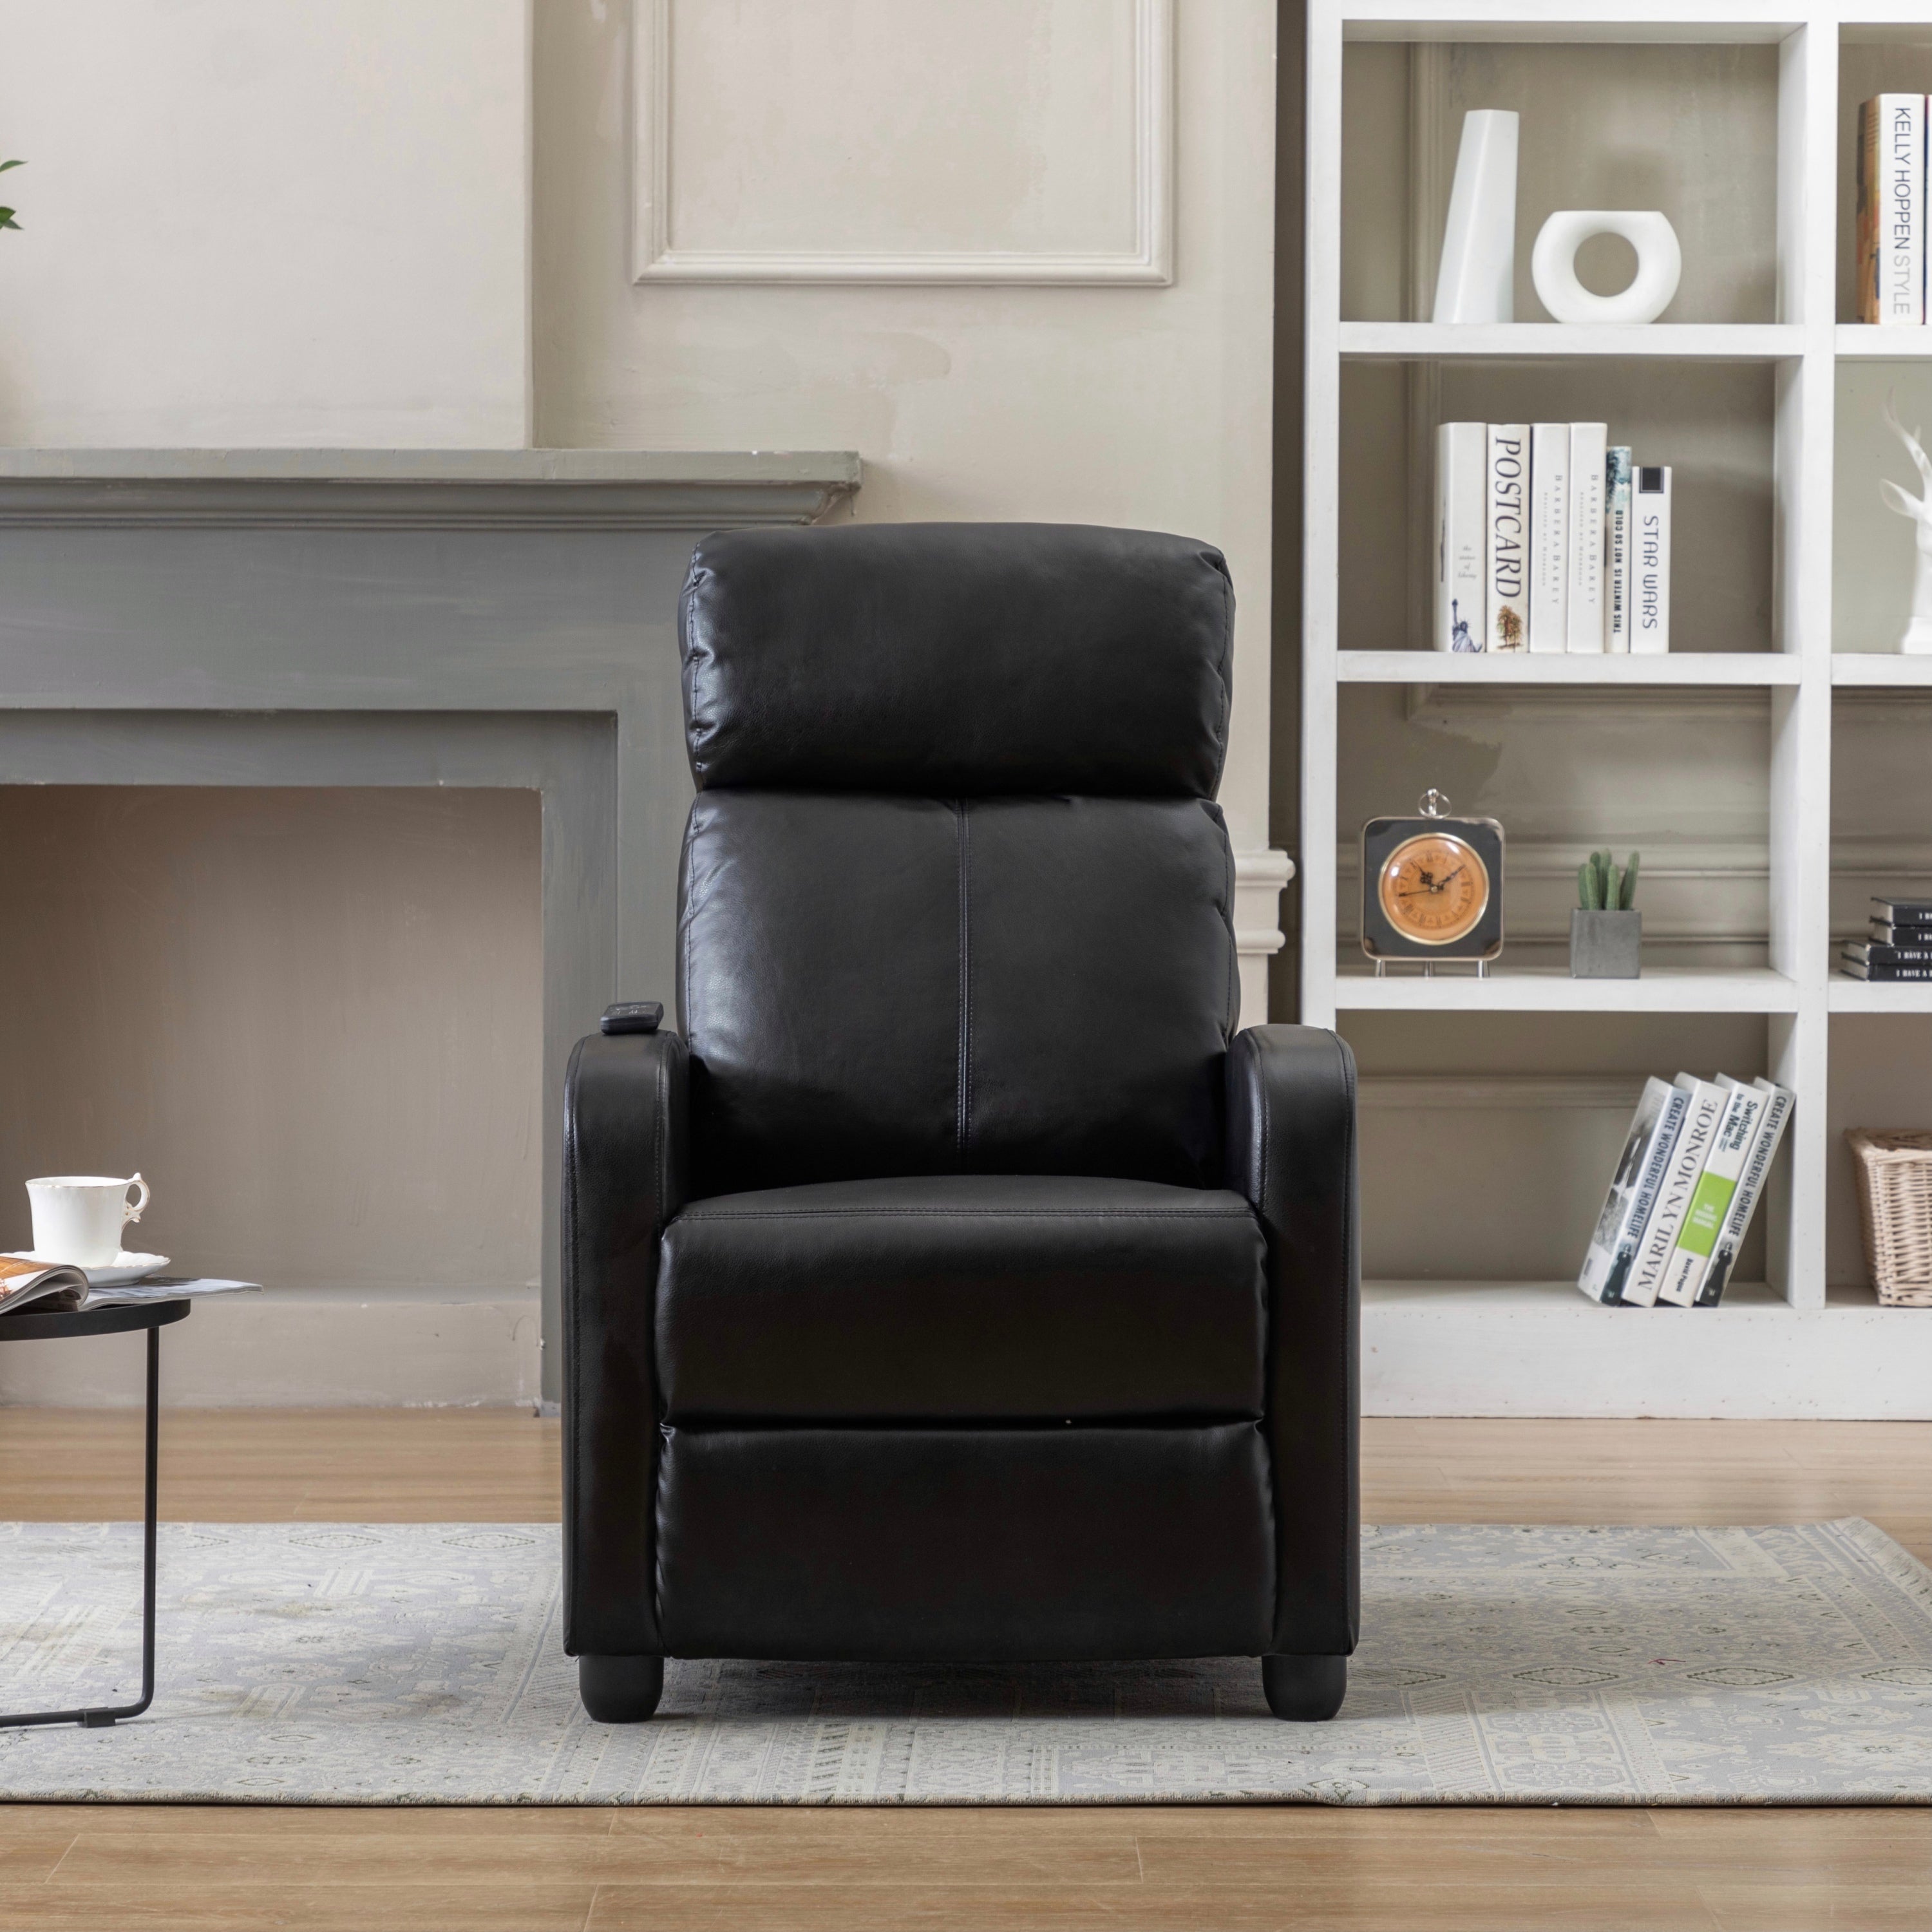 Blane Black Faux Leather Small Spaces Pushback Recliner With Massage and Heat 